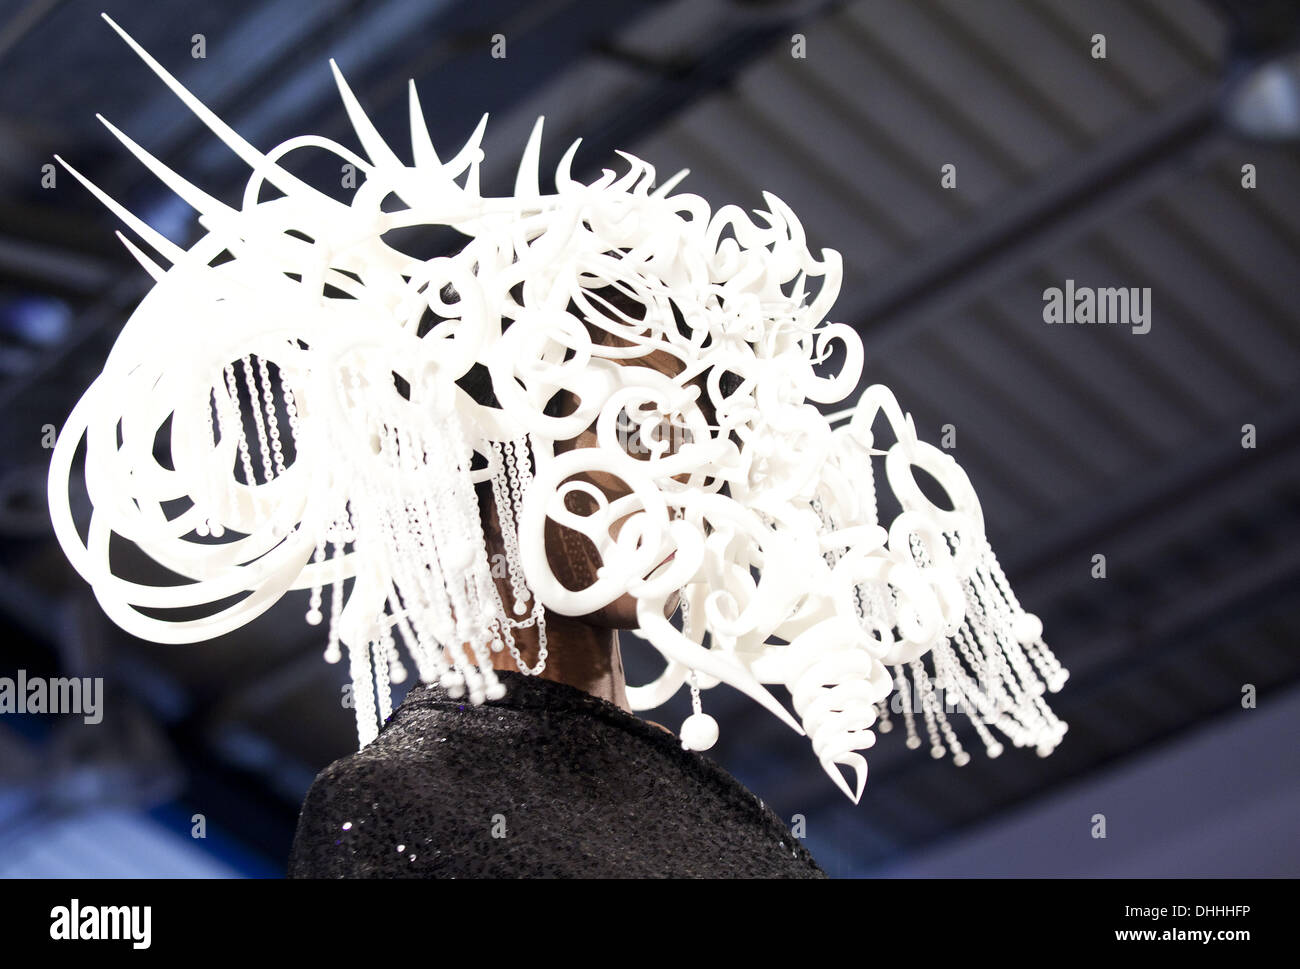 London, UK. 9th Nov, 2013. Quixotic Divinity Headdress by Joshua Harker at the 3D Fashion Show London.As the 3D printing has exploded into the public consciousness this year, second annual 3D Print Show in London has attracted many more exhibitors from all over the world, developers presenting innovations, 3D fashion and stunning artworks, Islington Business Center, London, UK. © Veronika Lukasova/ZUMAPRESS.com/Alamy Live News Stock Photo